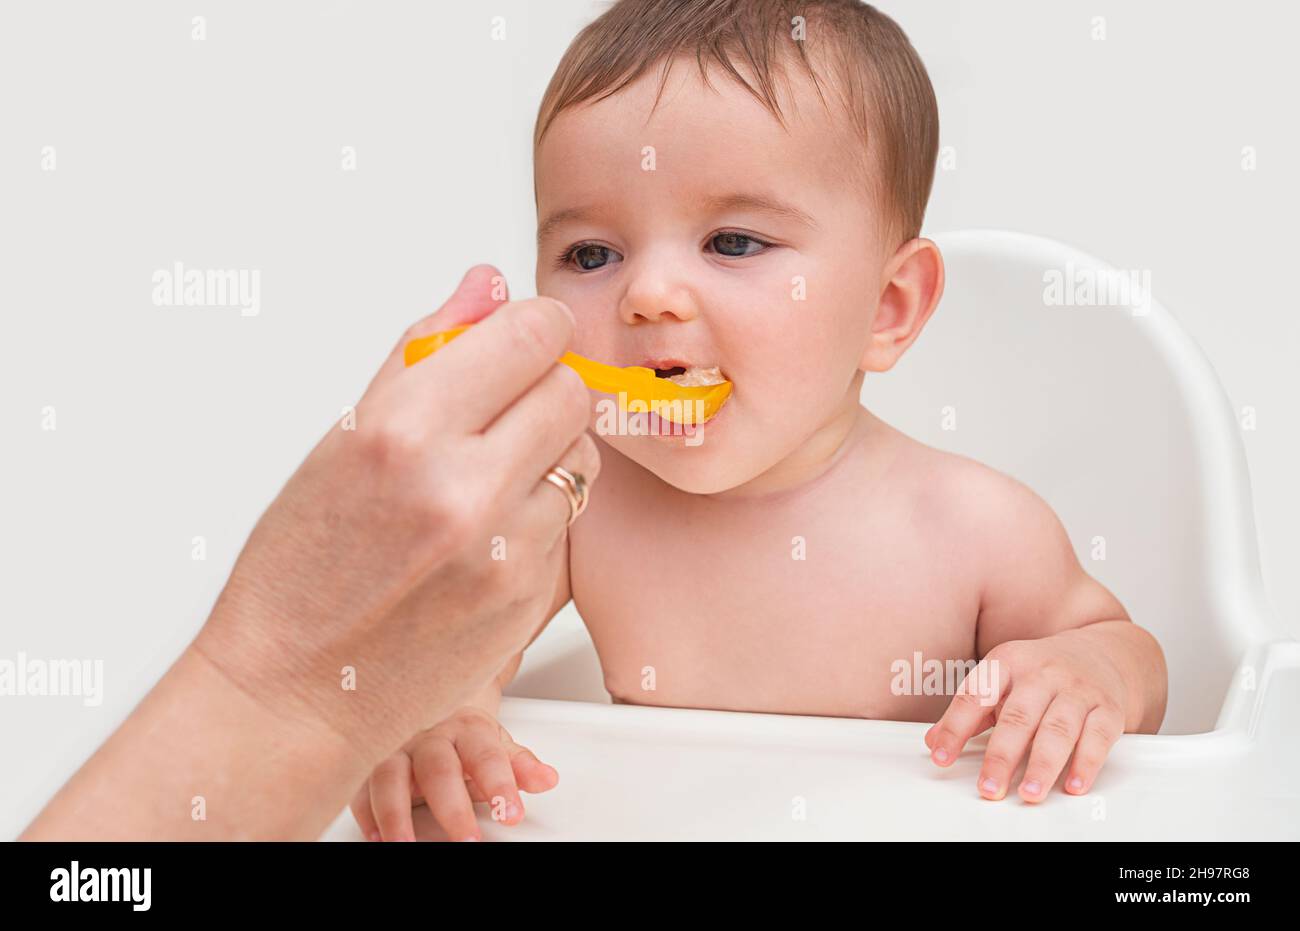 the first feeding of the baby.  the child opens his mouth to eat natural orange puree from an orange spoon from his mother's hand Stock Photo